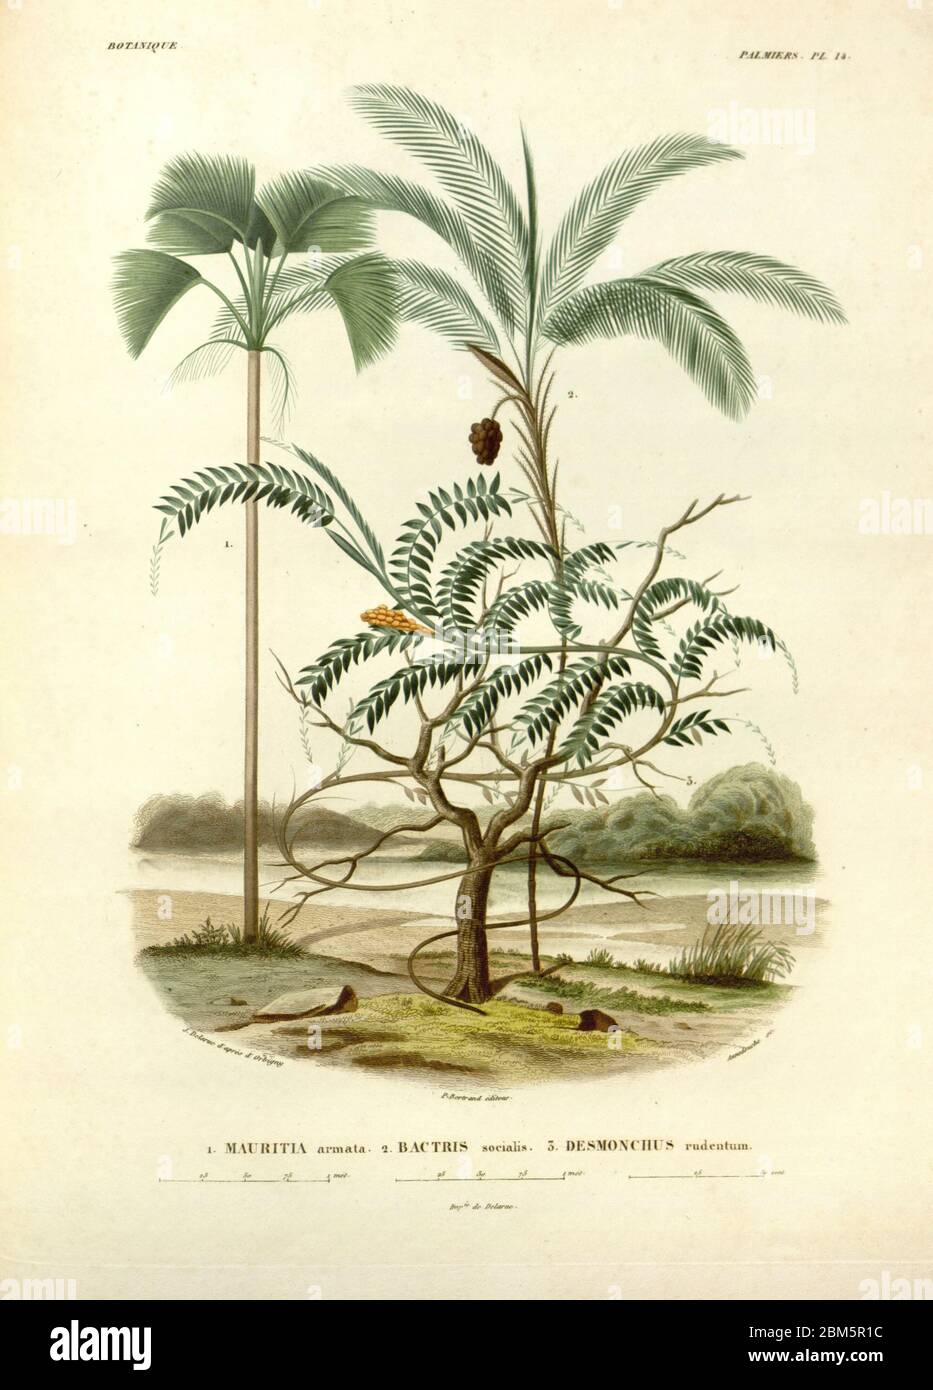 Palm trees of South America From the book 'Voyage dans l'Amérique Méridionale' [Journey to South America: (Brazil, the eastern republic of Uruguay, the Argentine Republic, Patagonia, the republic of Chile, the republic of Bolivia, the republic of Peru), executed during the years 1826 - 1833] By: Orbigny, Alcide Dessalines d', 1802-1857; Montagne, Jean François Camille, 1784-1866; Martius, Karl Friedrich Philipp von, 1794-1868 Published Paris :Chez Pitois-Levrault et c.e ... ;1835-1847 Stock Photo